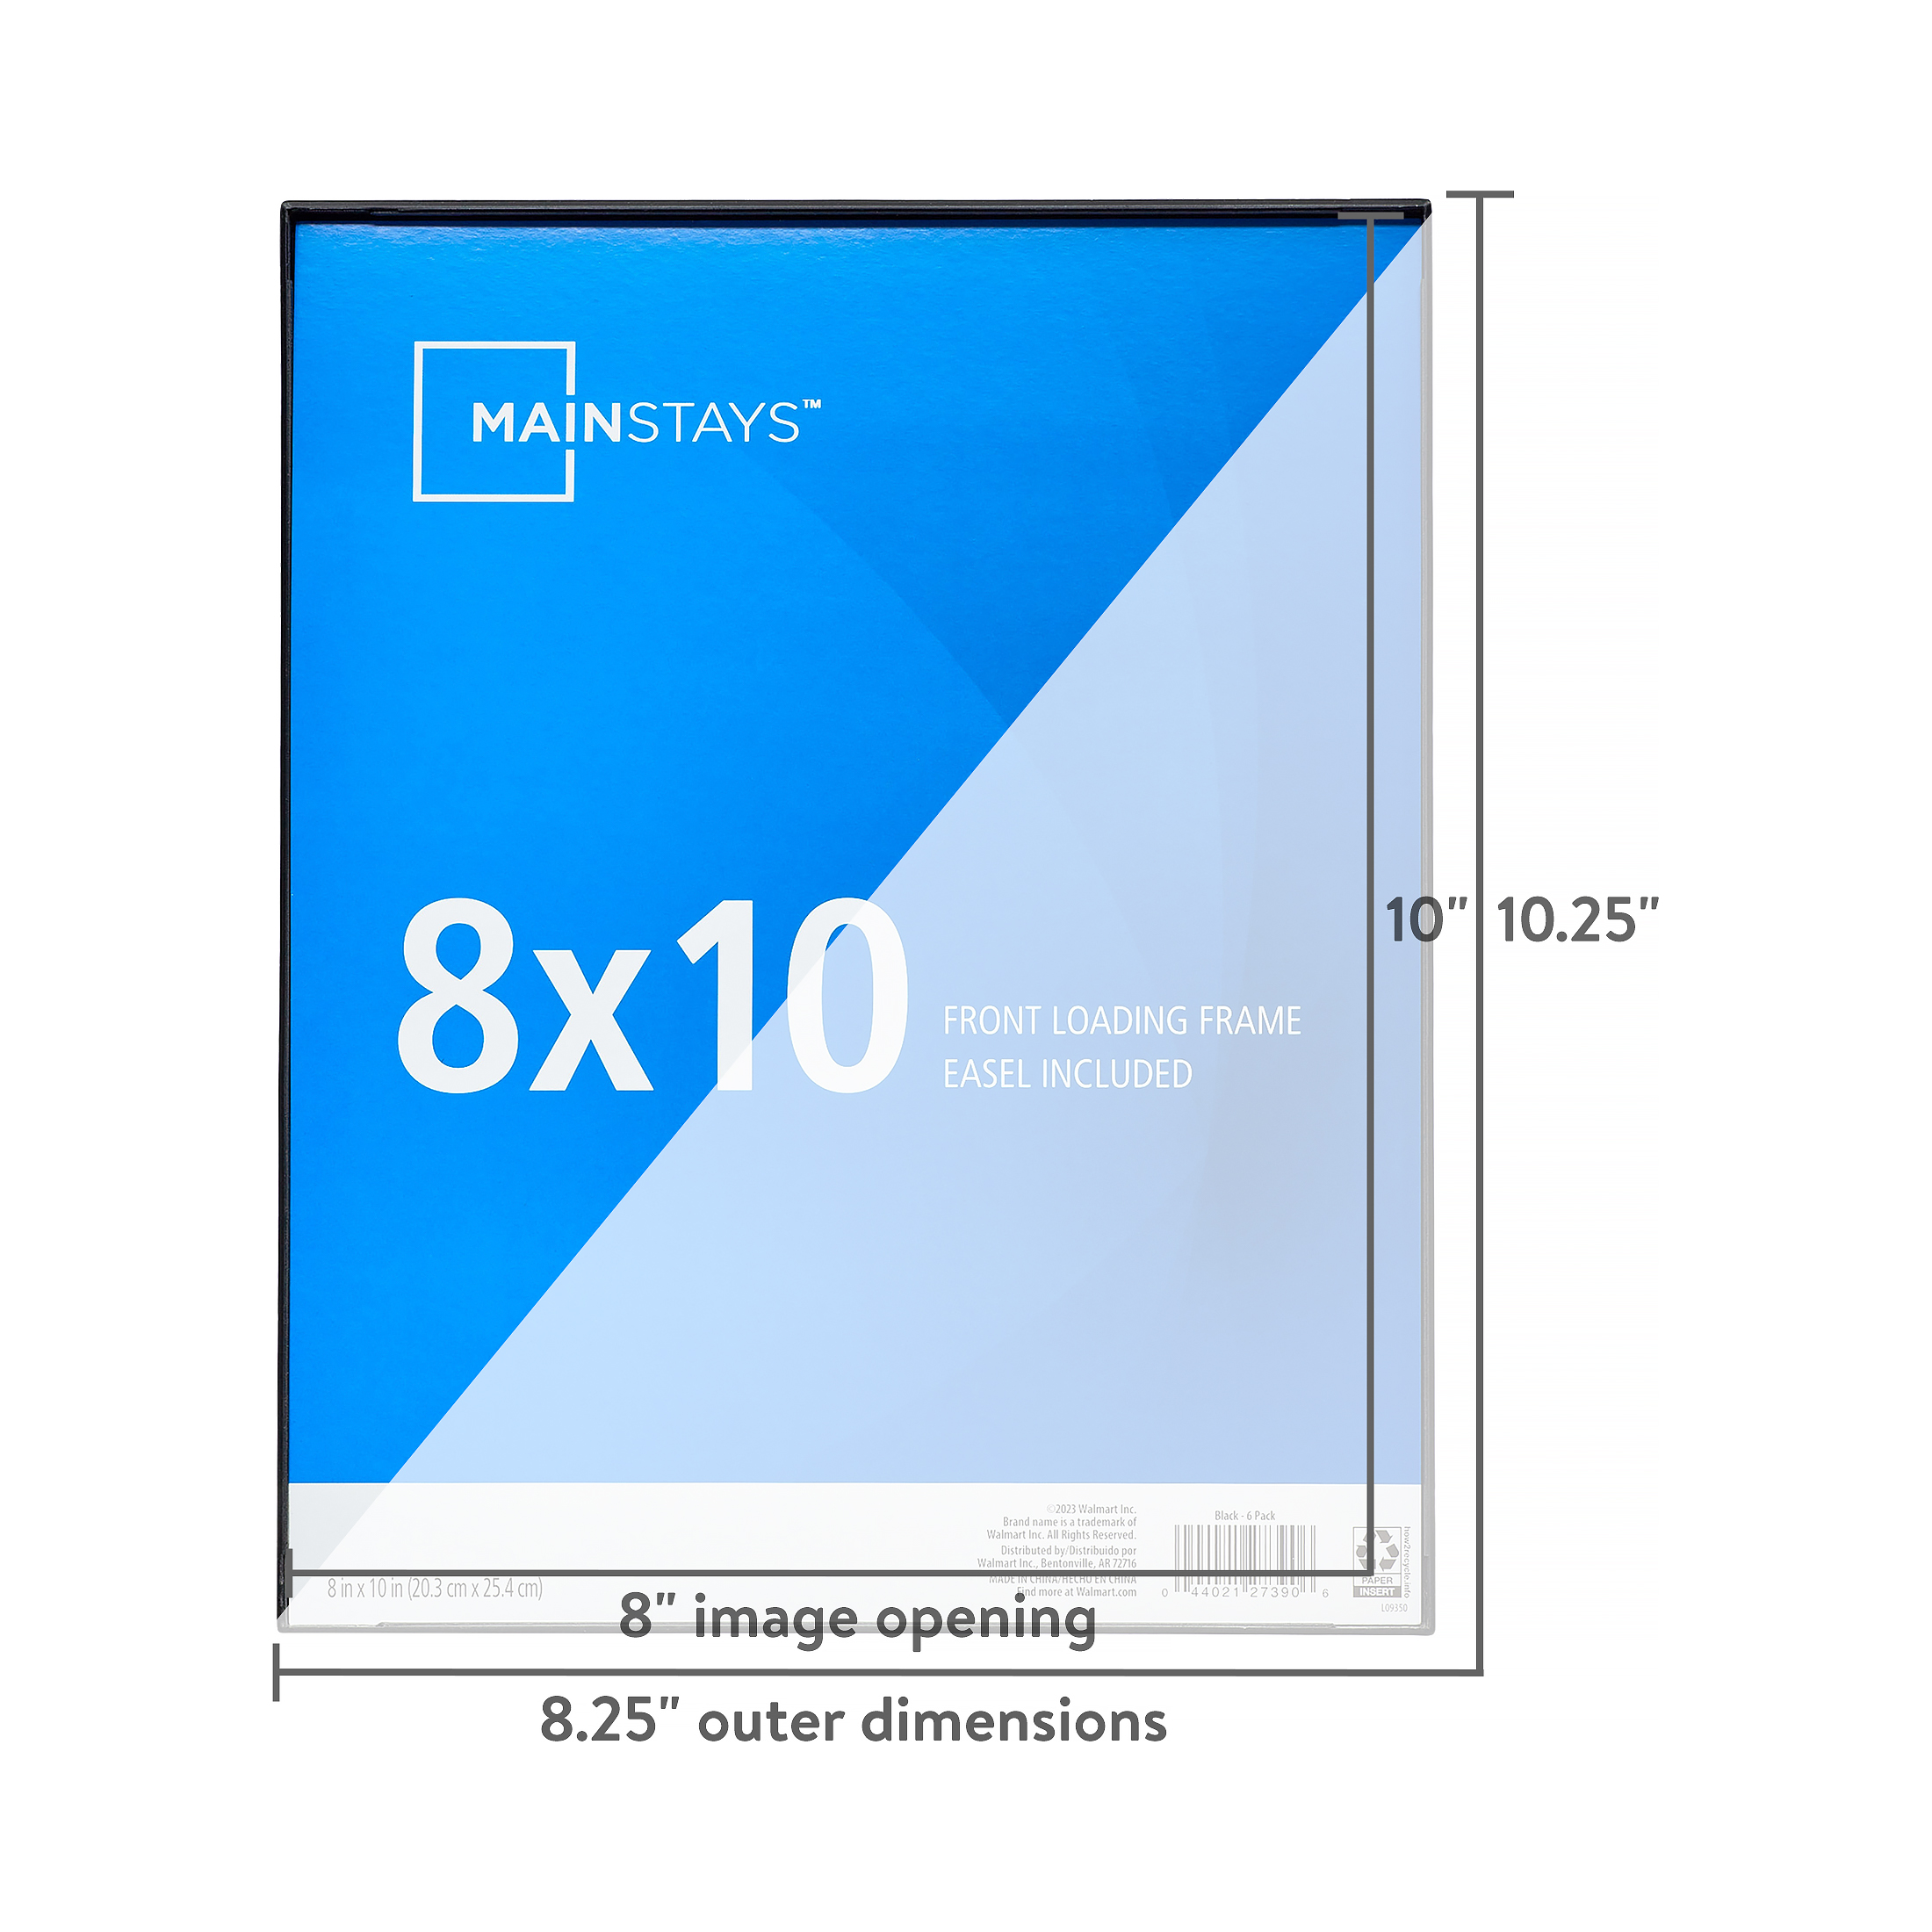 Mainstays 8x10 Front Loading Picture Frames, Black, Set of 6 - image 4 of 8